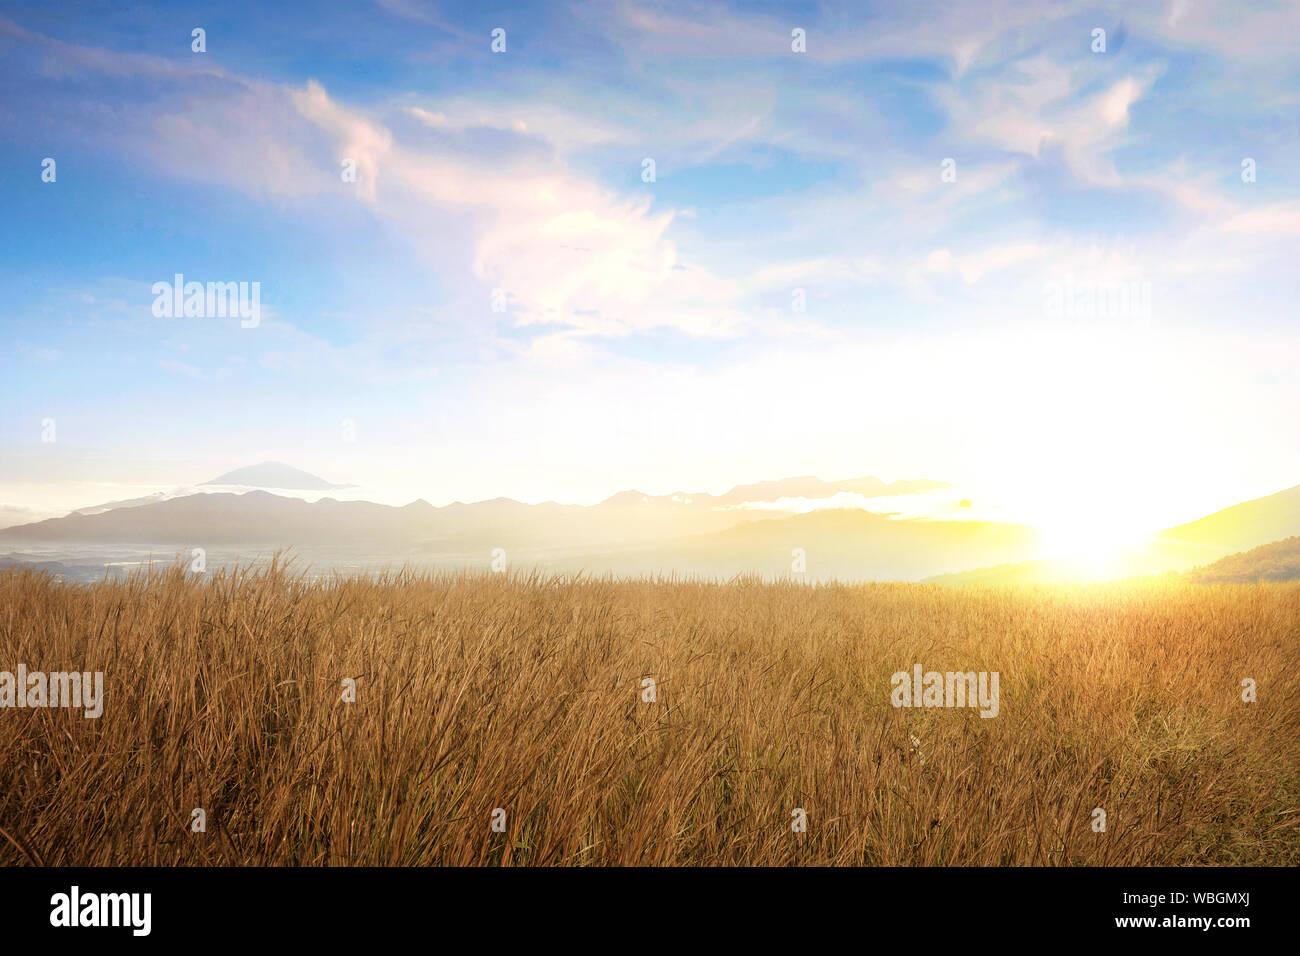 Dry grass field with sunlight over blue sky background Stock Photo